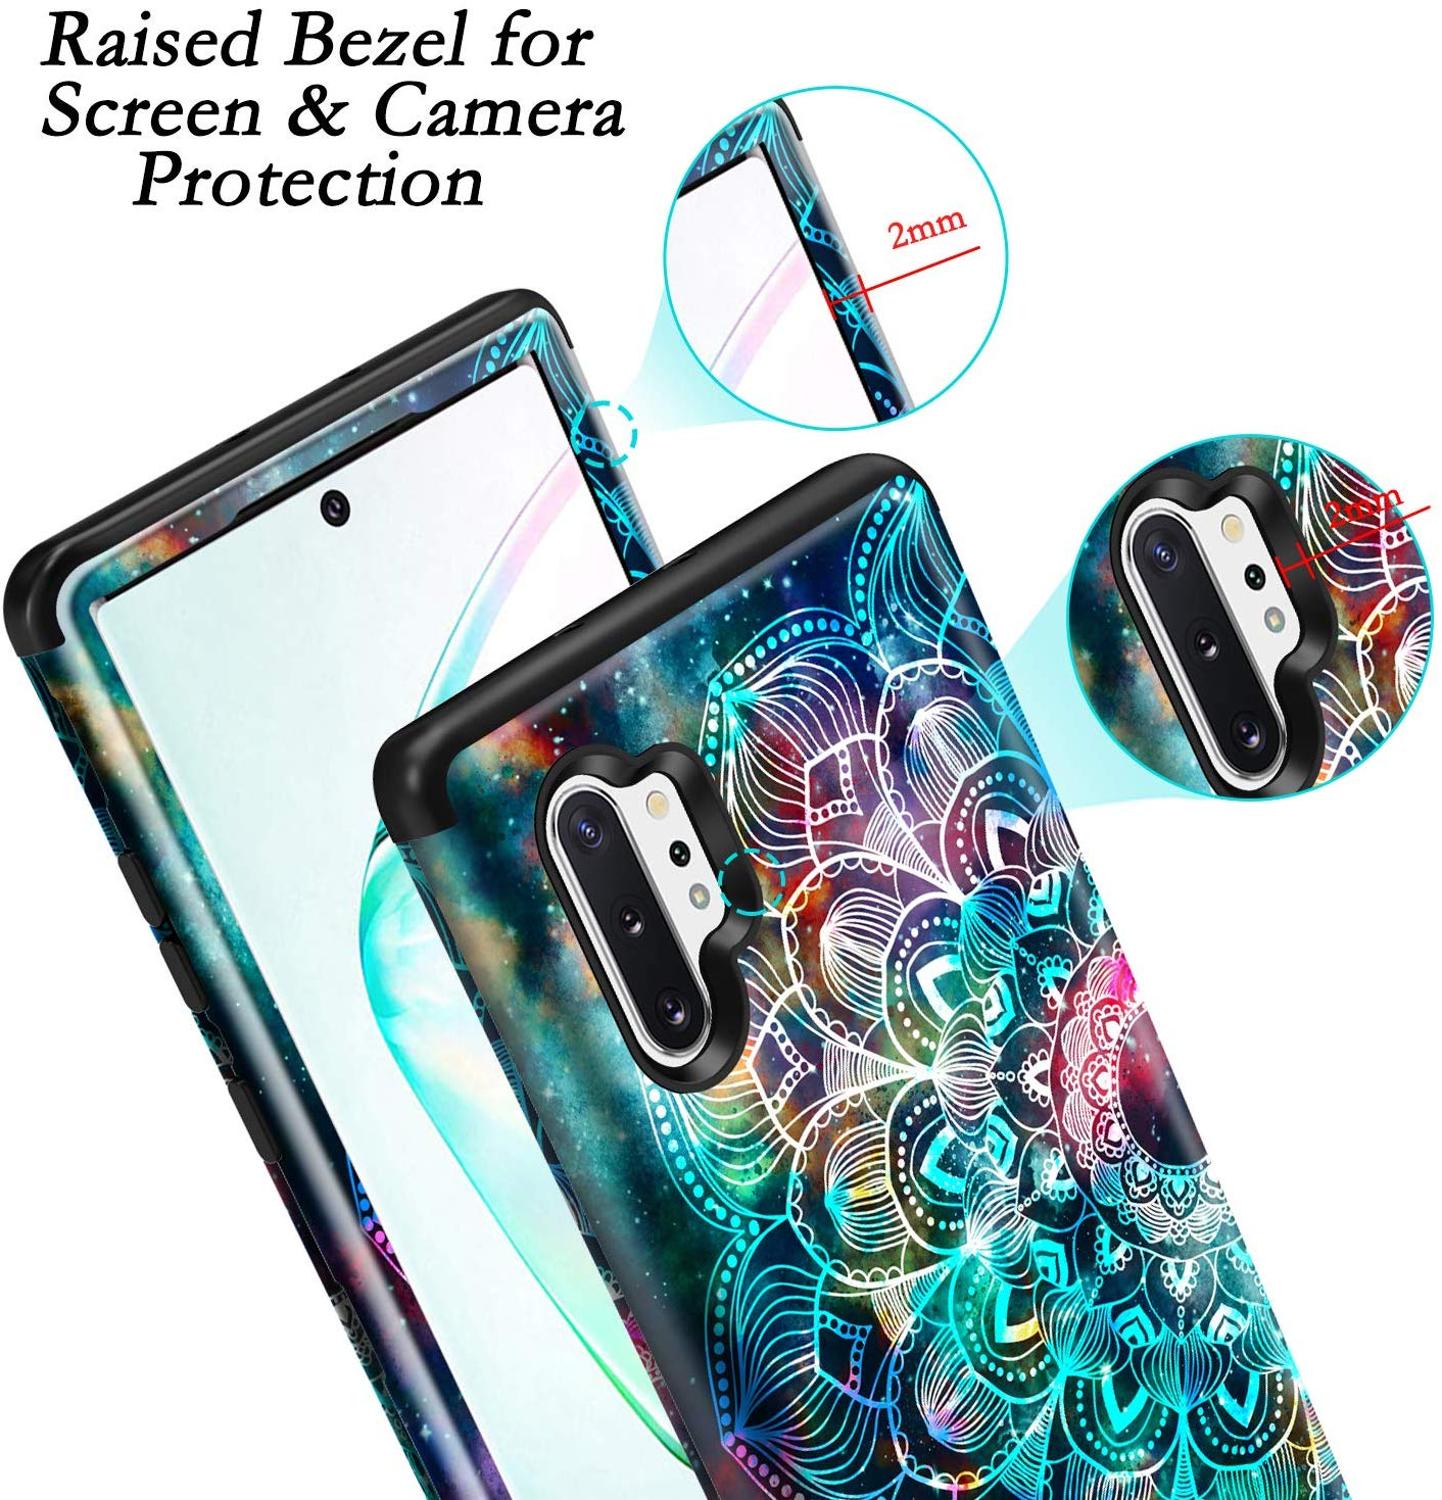 For Samsung Galaxy S9 S10 Plus Note 10 Note 9 Case, 360 Full Body Coverage Hard PC+Soft Silicone TPU 3in1 Shockproof Cover - 380230 Find Epic Store